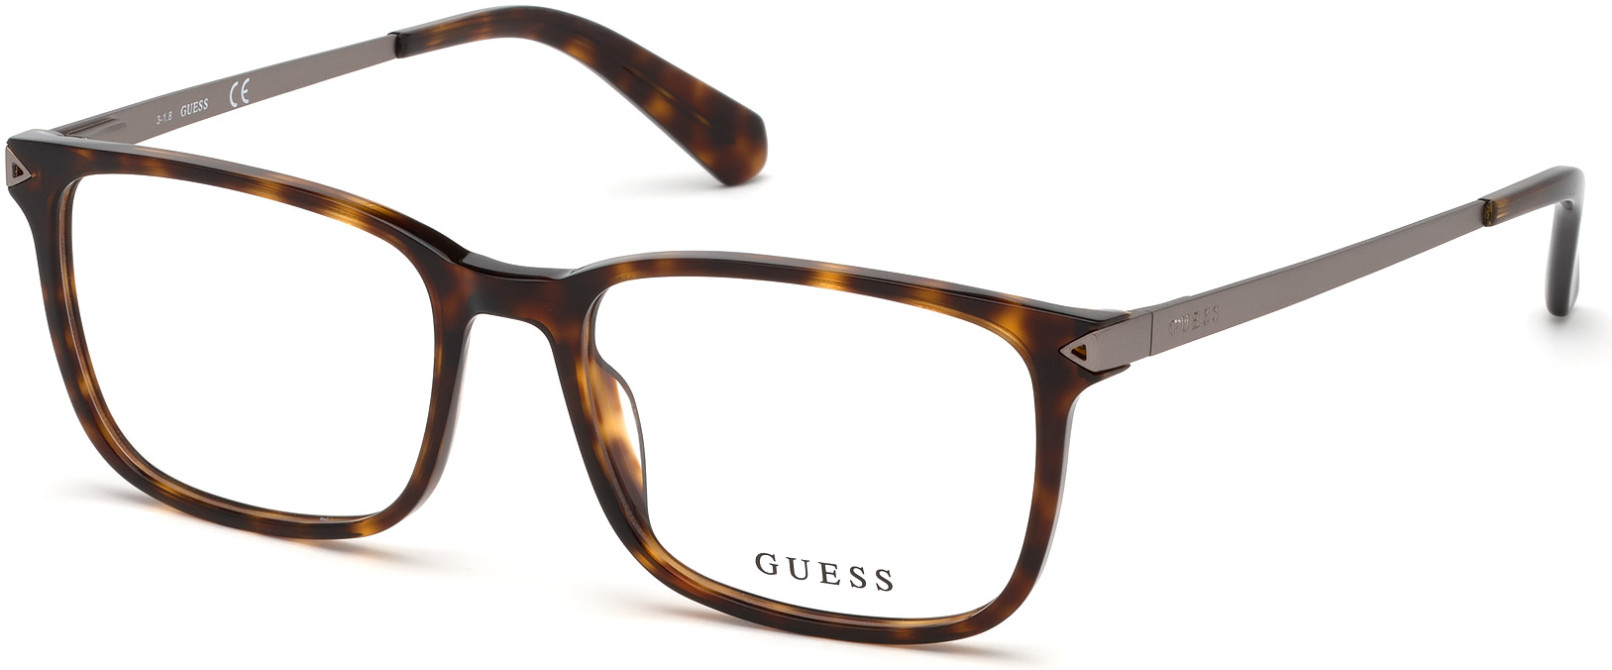 GUESS 1963 052